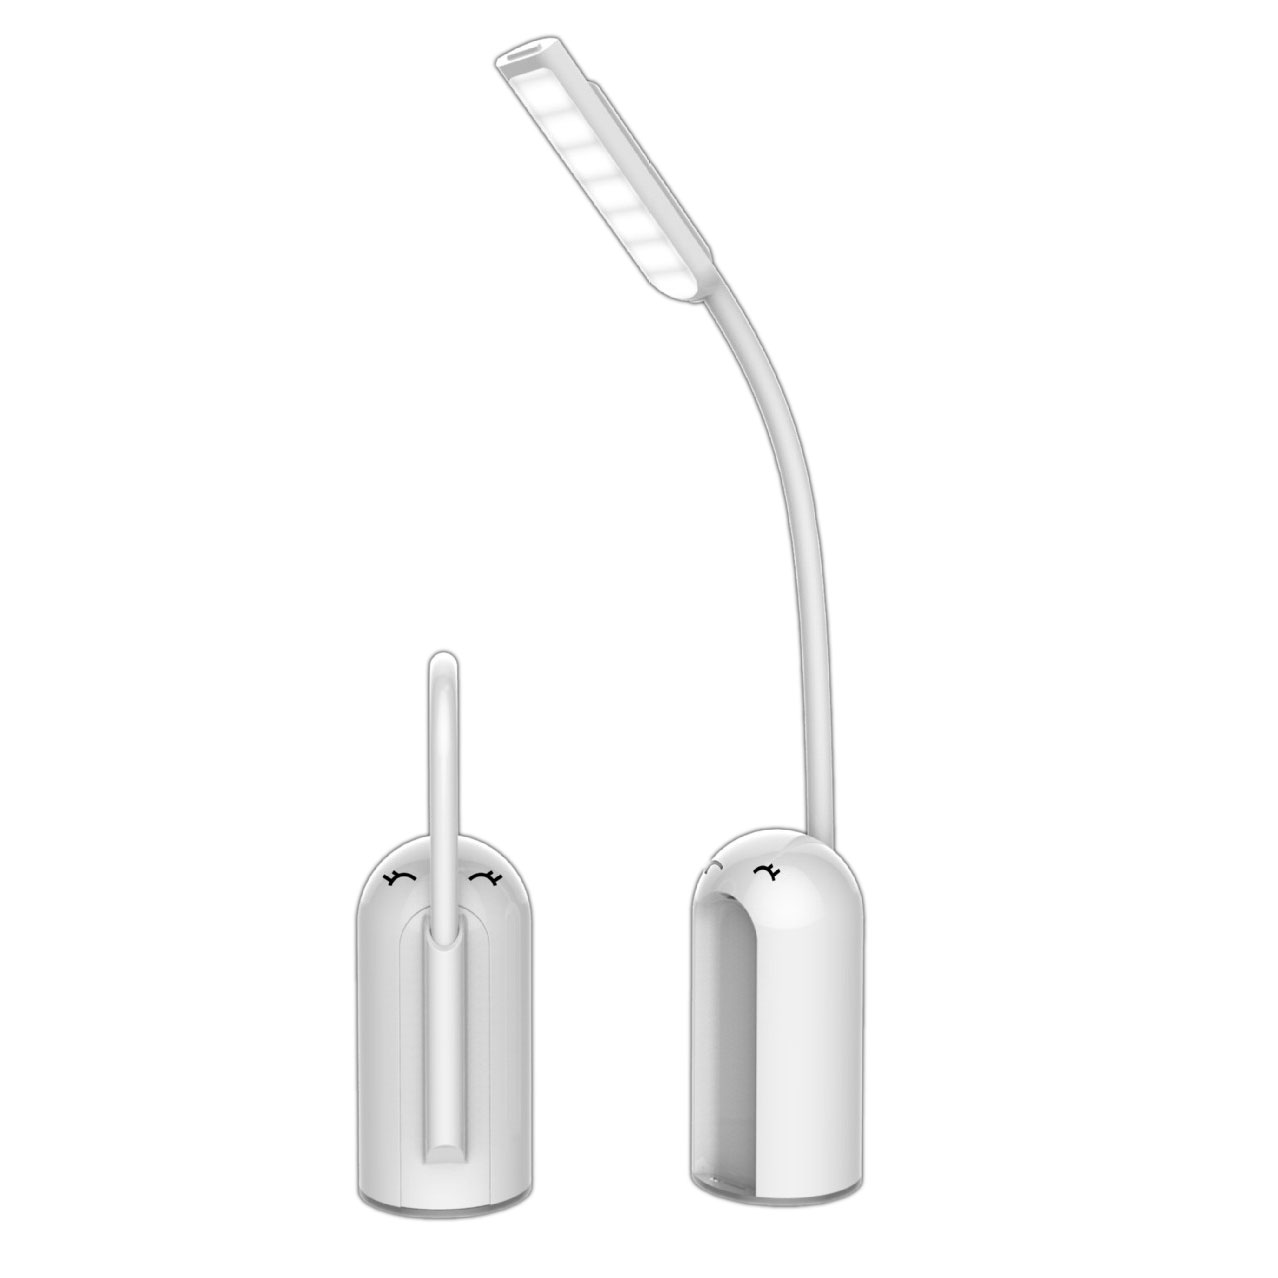 Cute Portable LED Desk LAMP with Power Bank Charger 5000 mAh (White)